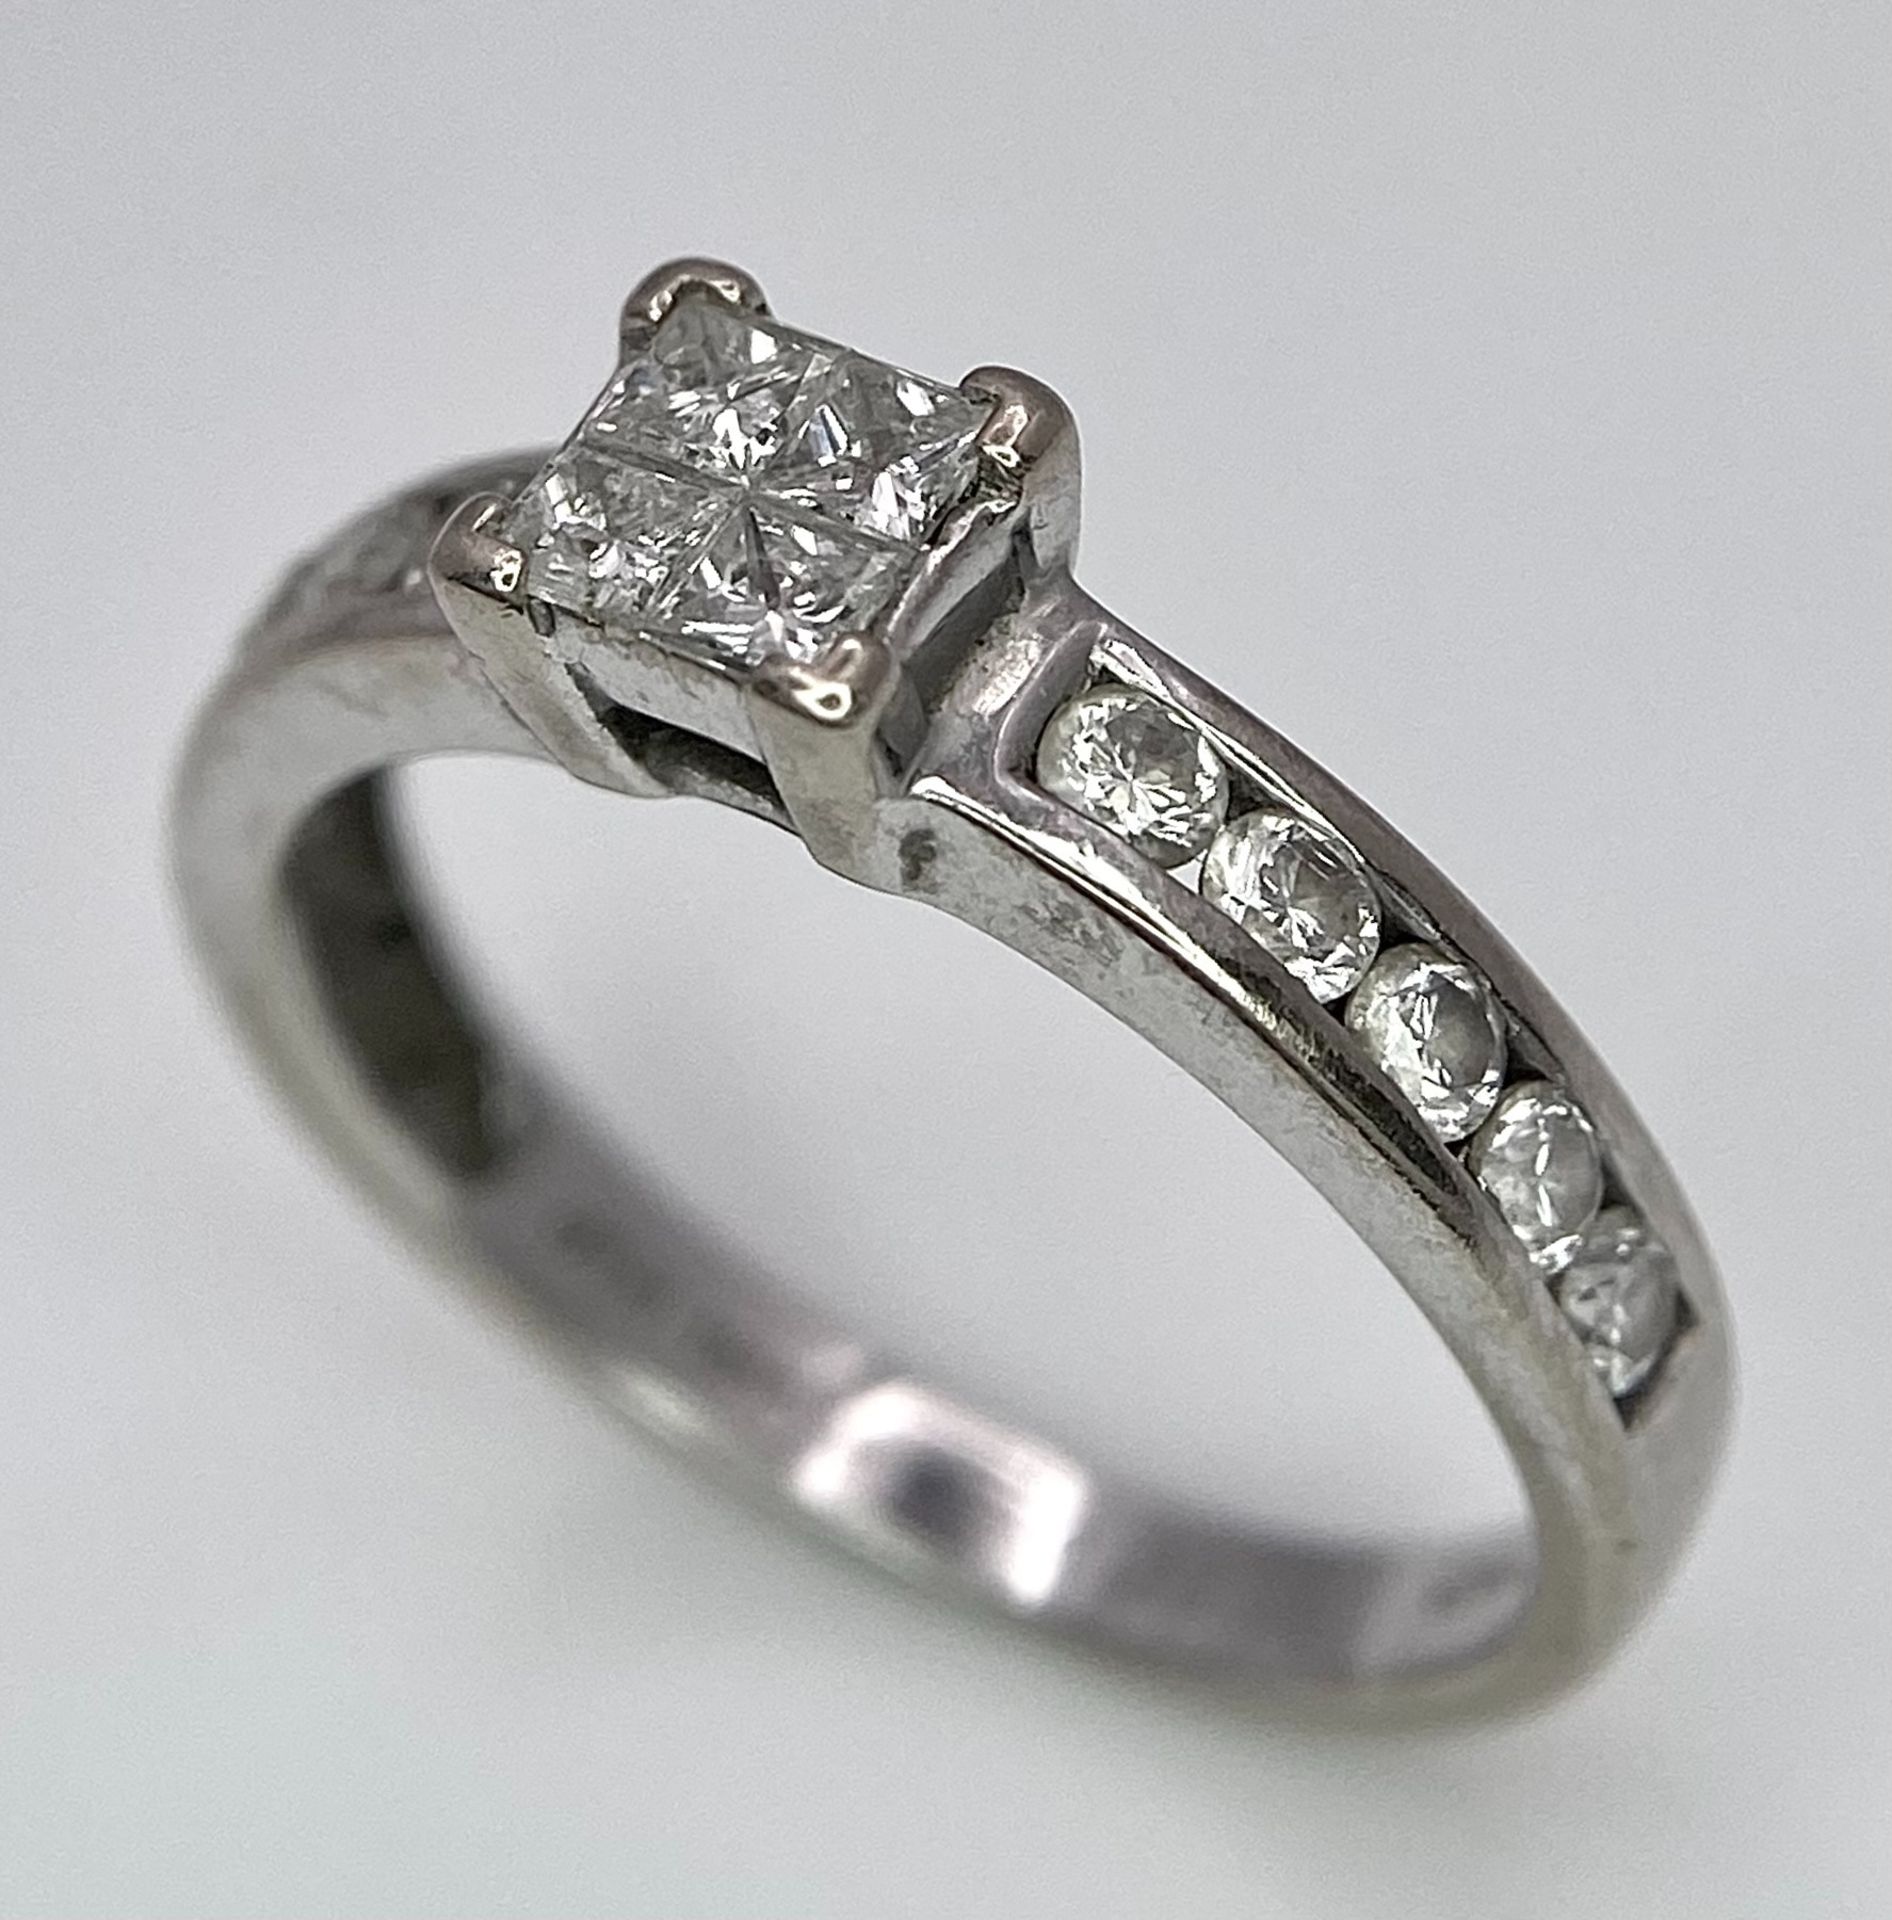 An 18K White Gold and Diamond Ring. Square and round cut diamonds. Size J. 2.6g total weight.